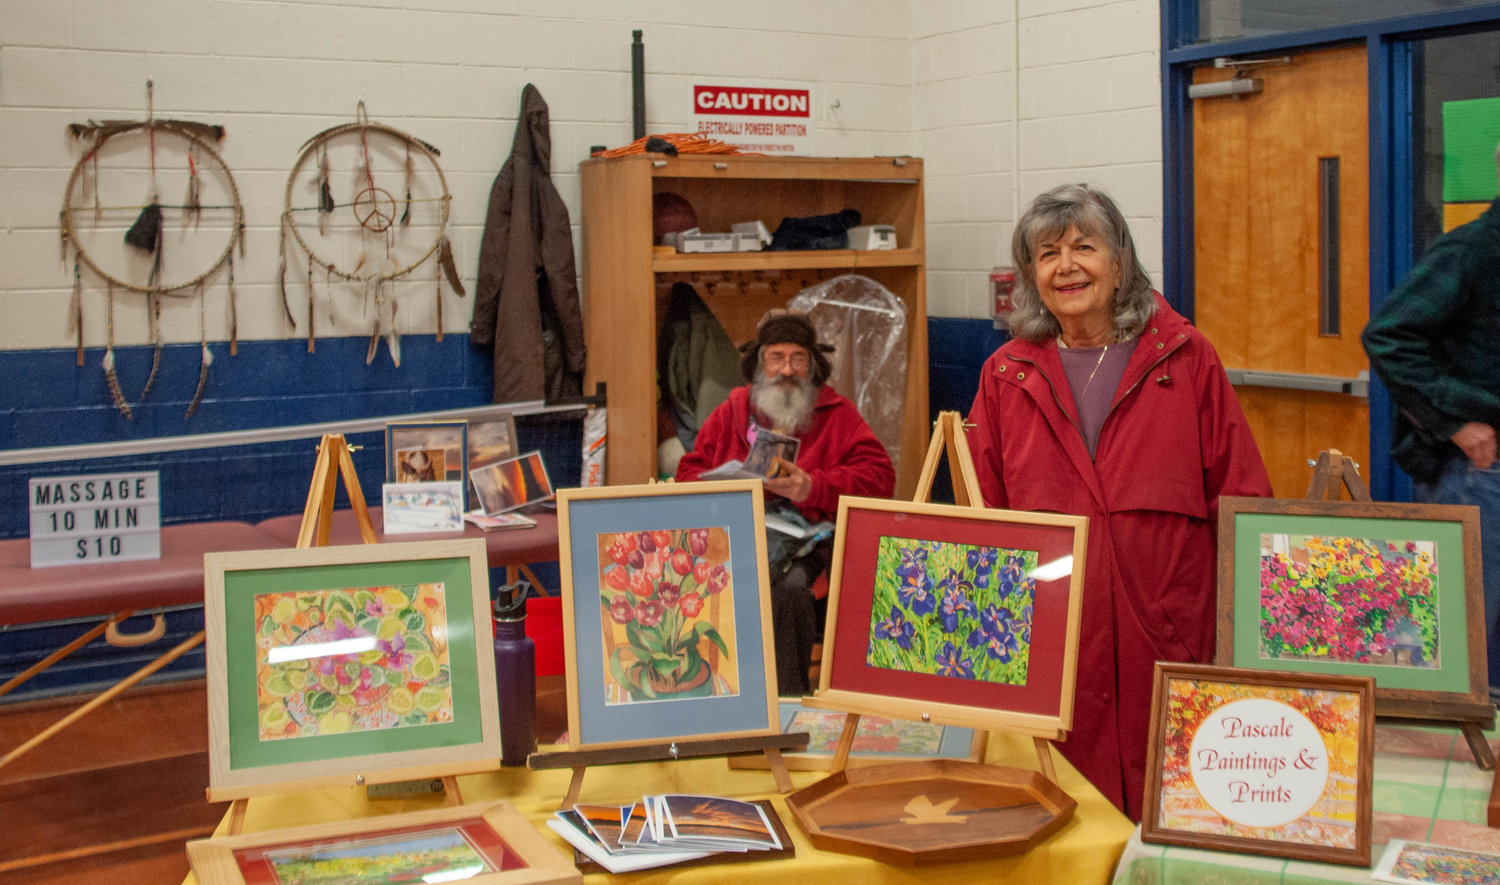 The Kauneonga Lake Farmers Market features local makers offering an assortment of goods, including original paintings like these created by the talented Susan Pascale.